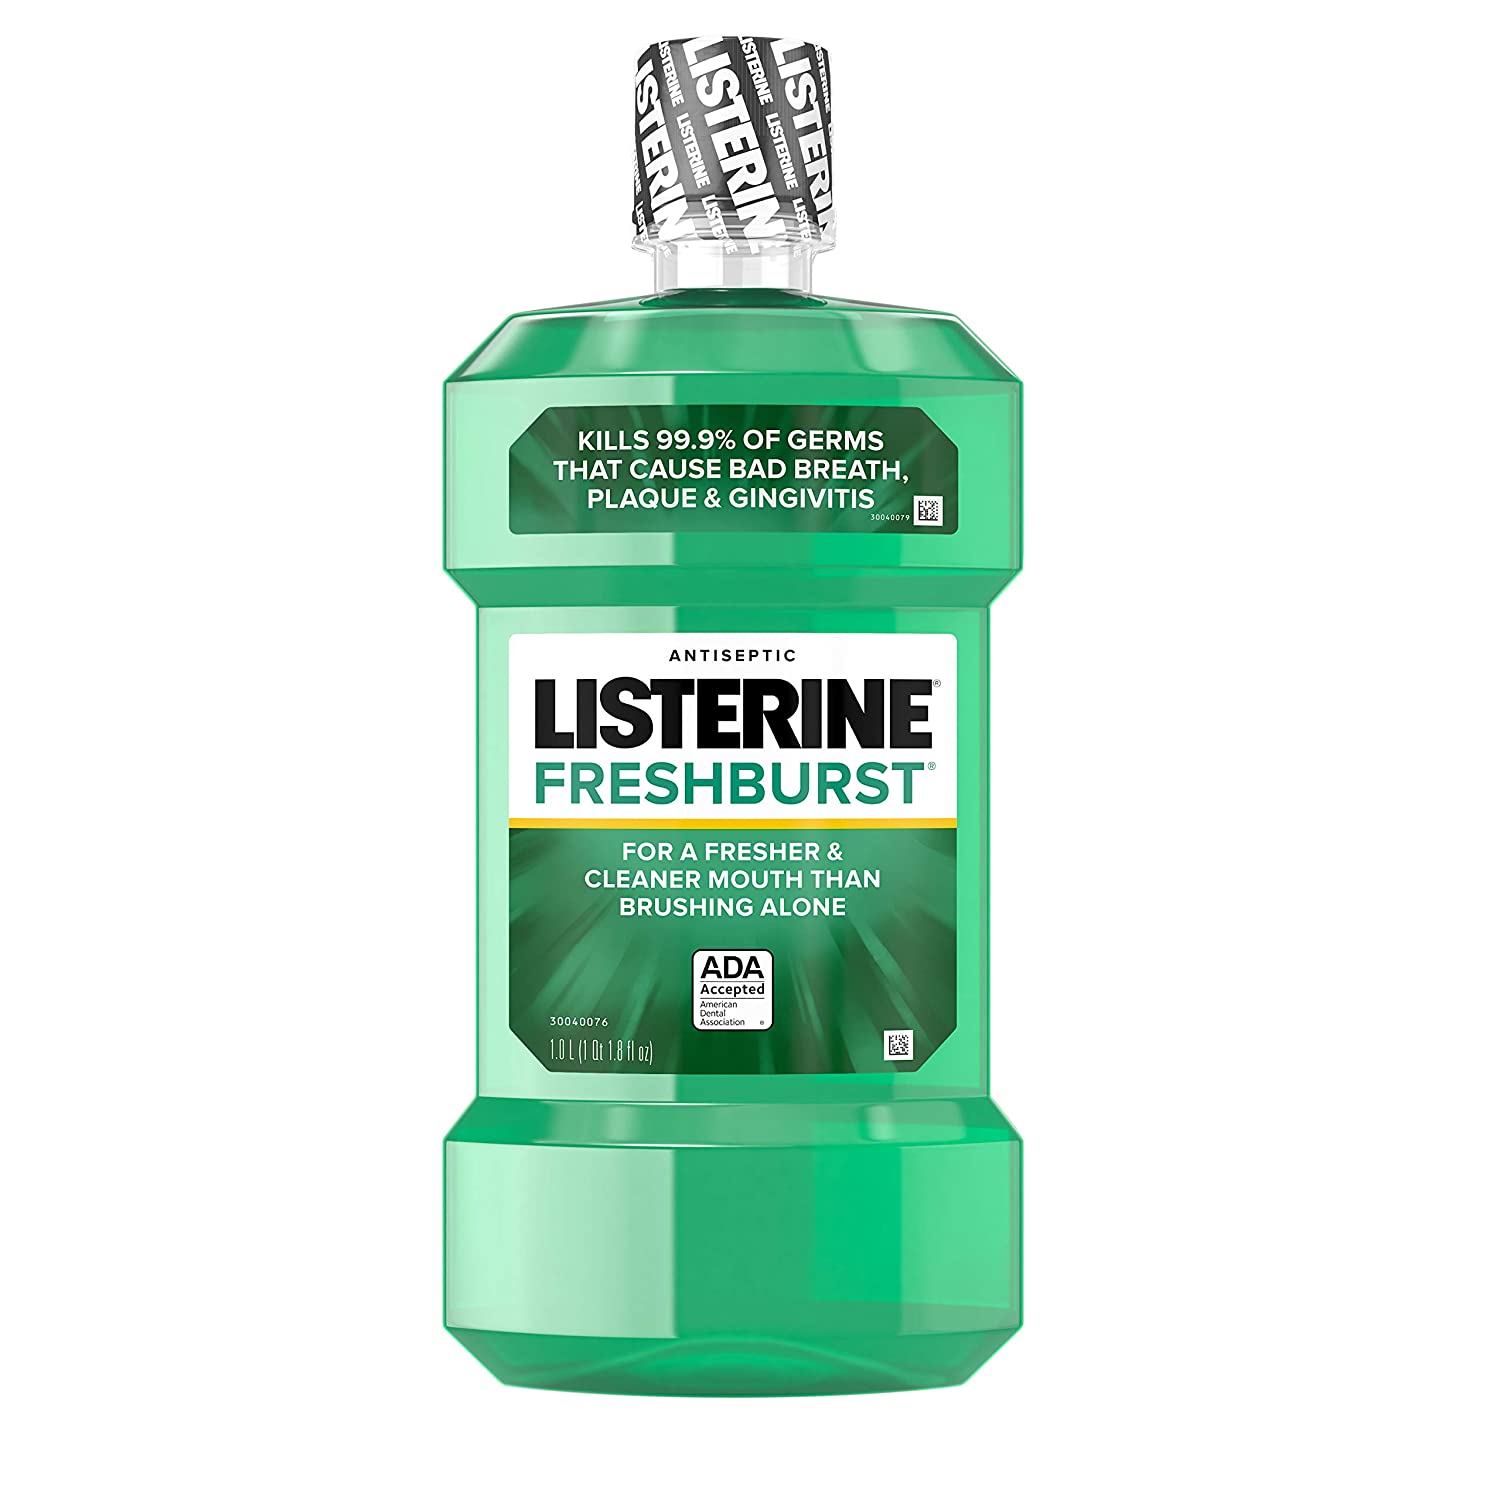 1-L Listerine Freshburst Antiseptic Mouthwash $3.90 w/ S&S + Free Shipping w/ Prime or on $25+